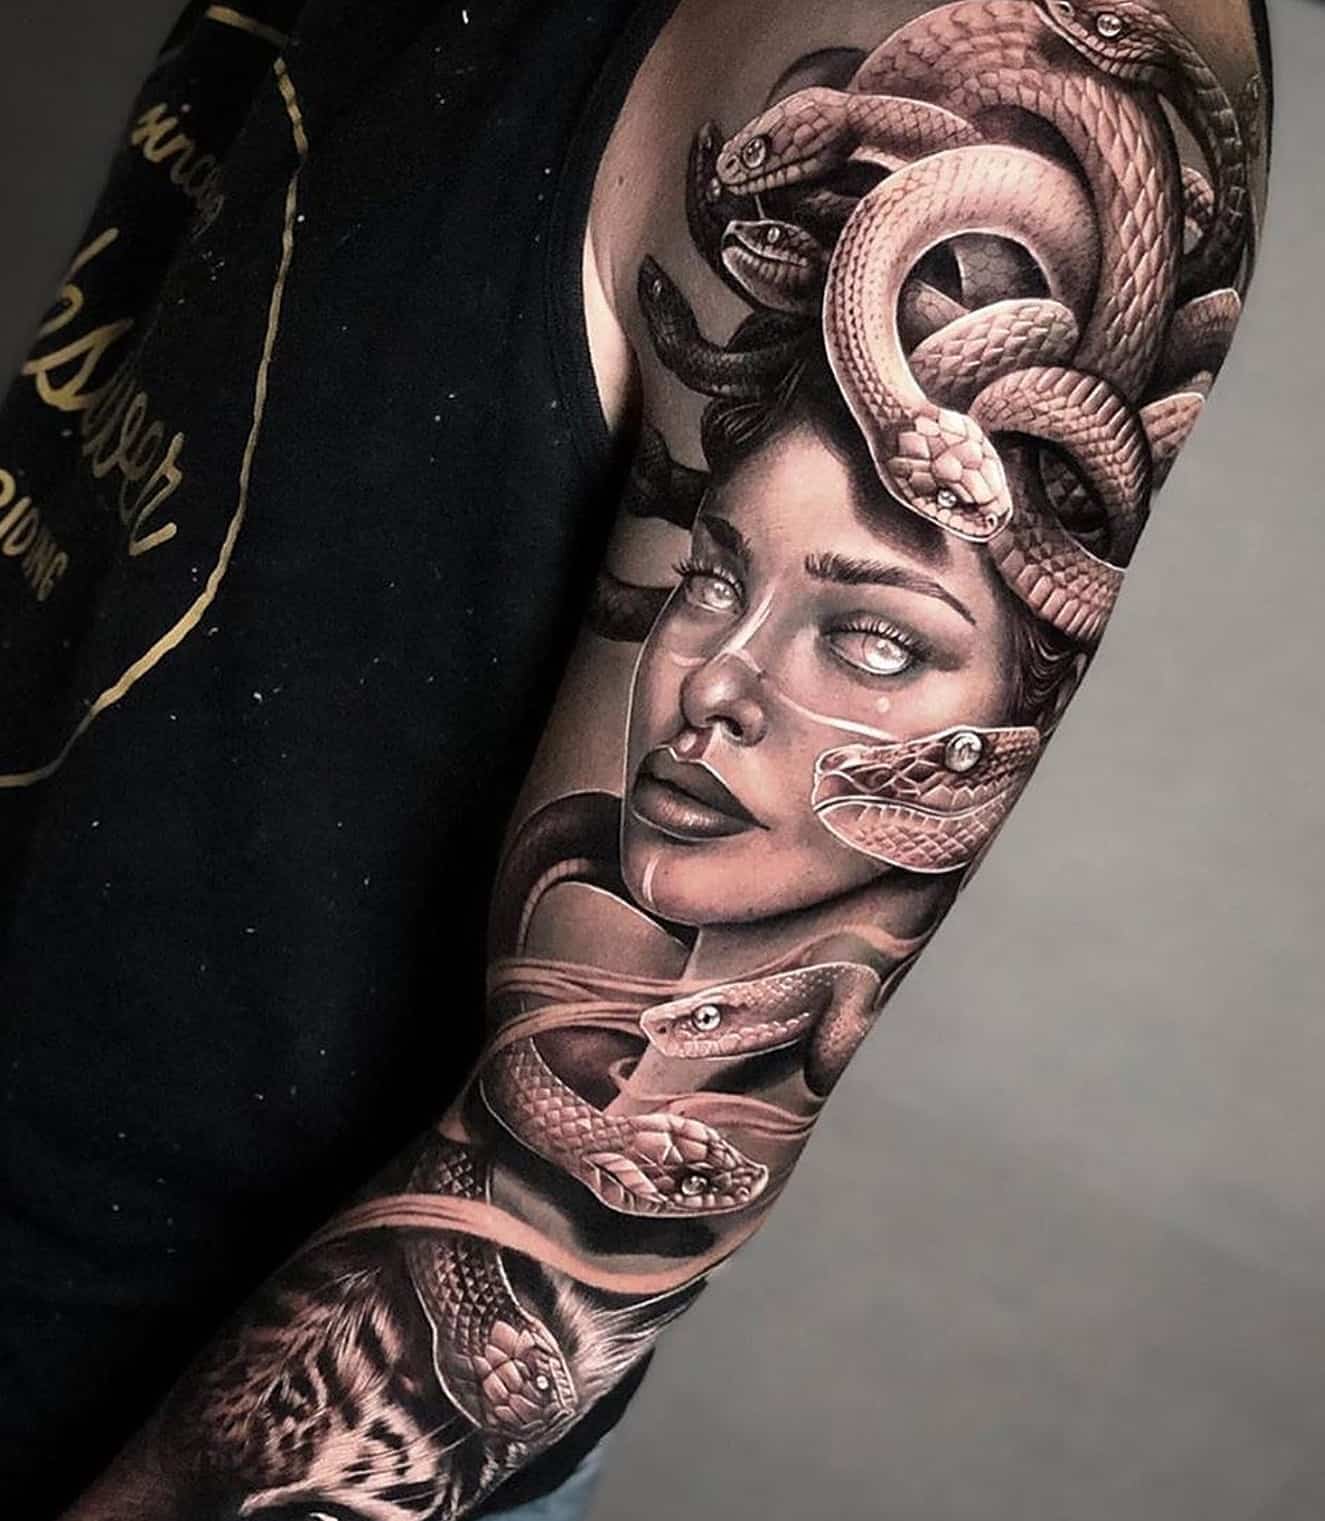 Medusa Tattoos: What Do They Symbolize? (With Images)